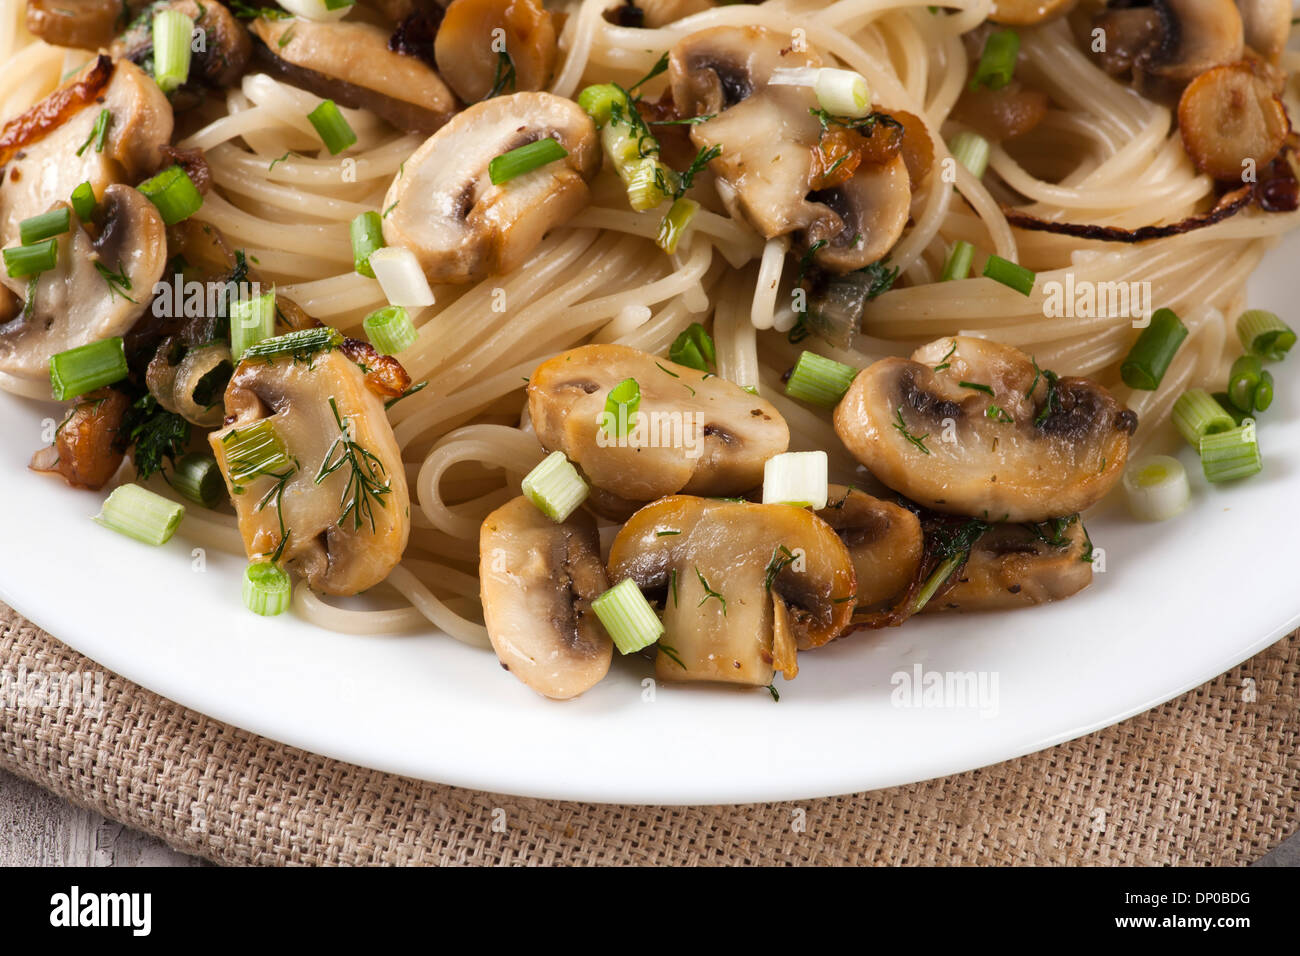 Spaghetti with mushrooms and herbs Stock Photo